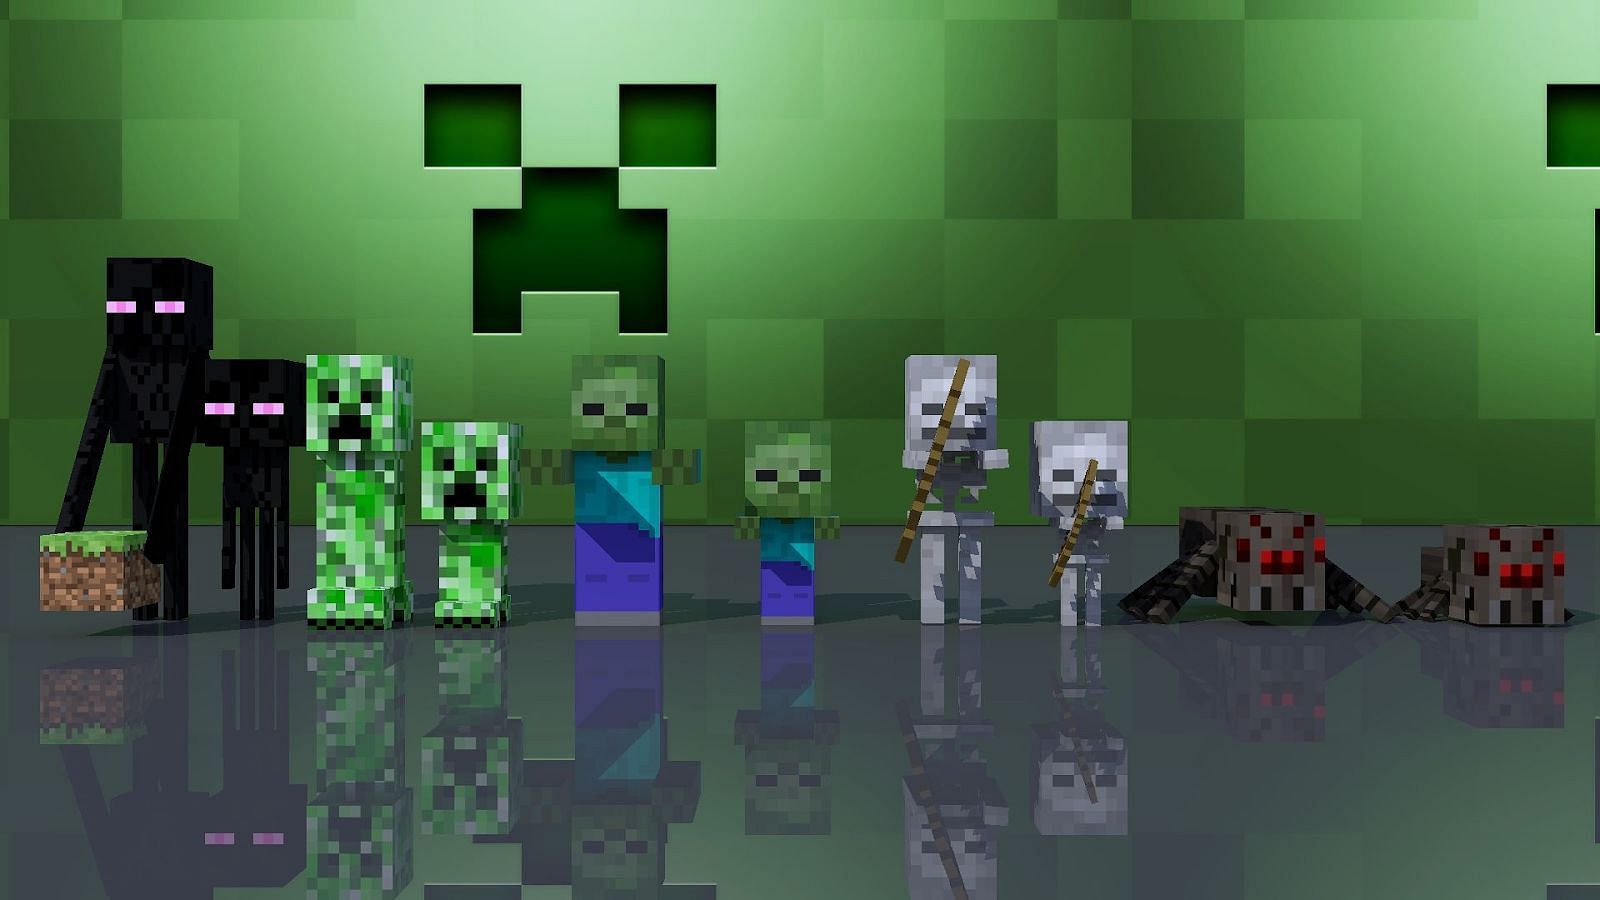 minecraft baby monsters